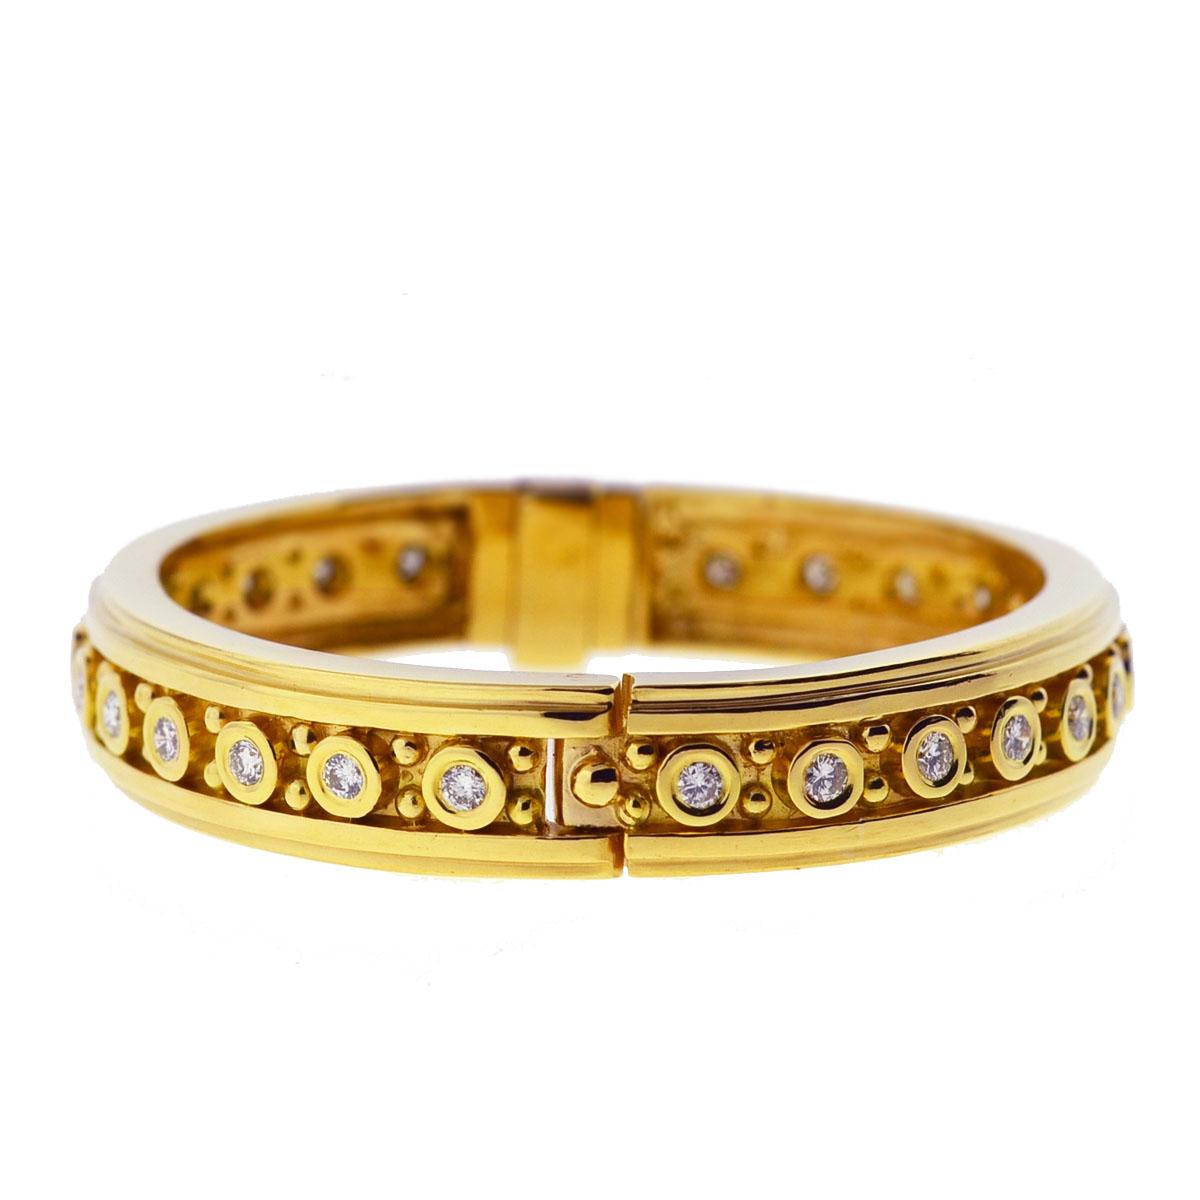 Style- Bangle Bracelet
Metal- 18k Yellow Gold
Closure- Bracelet Clasp
Stones- 28 Round Diamonds (Approx. 1.5 ctw)
Weight- 57.23 Grams
Length- Fits 6.5″ Wrist
Includes- Bracelet ONLY
SKU- 10159-1TOEE